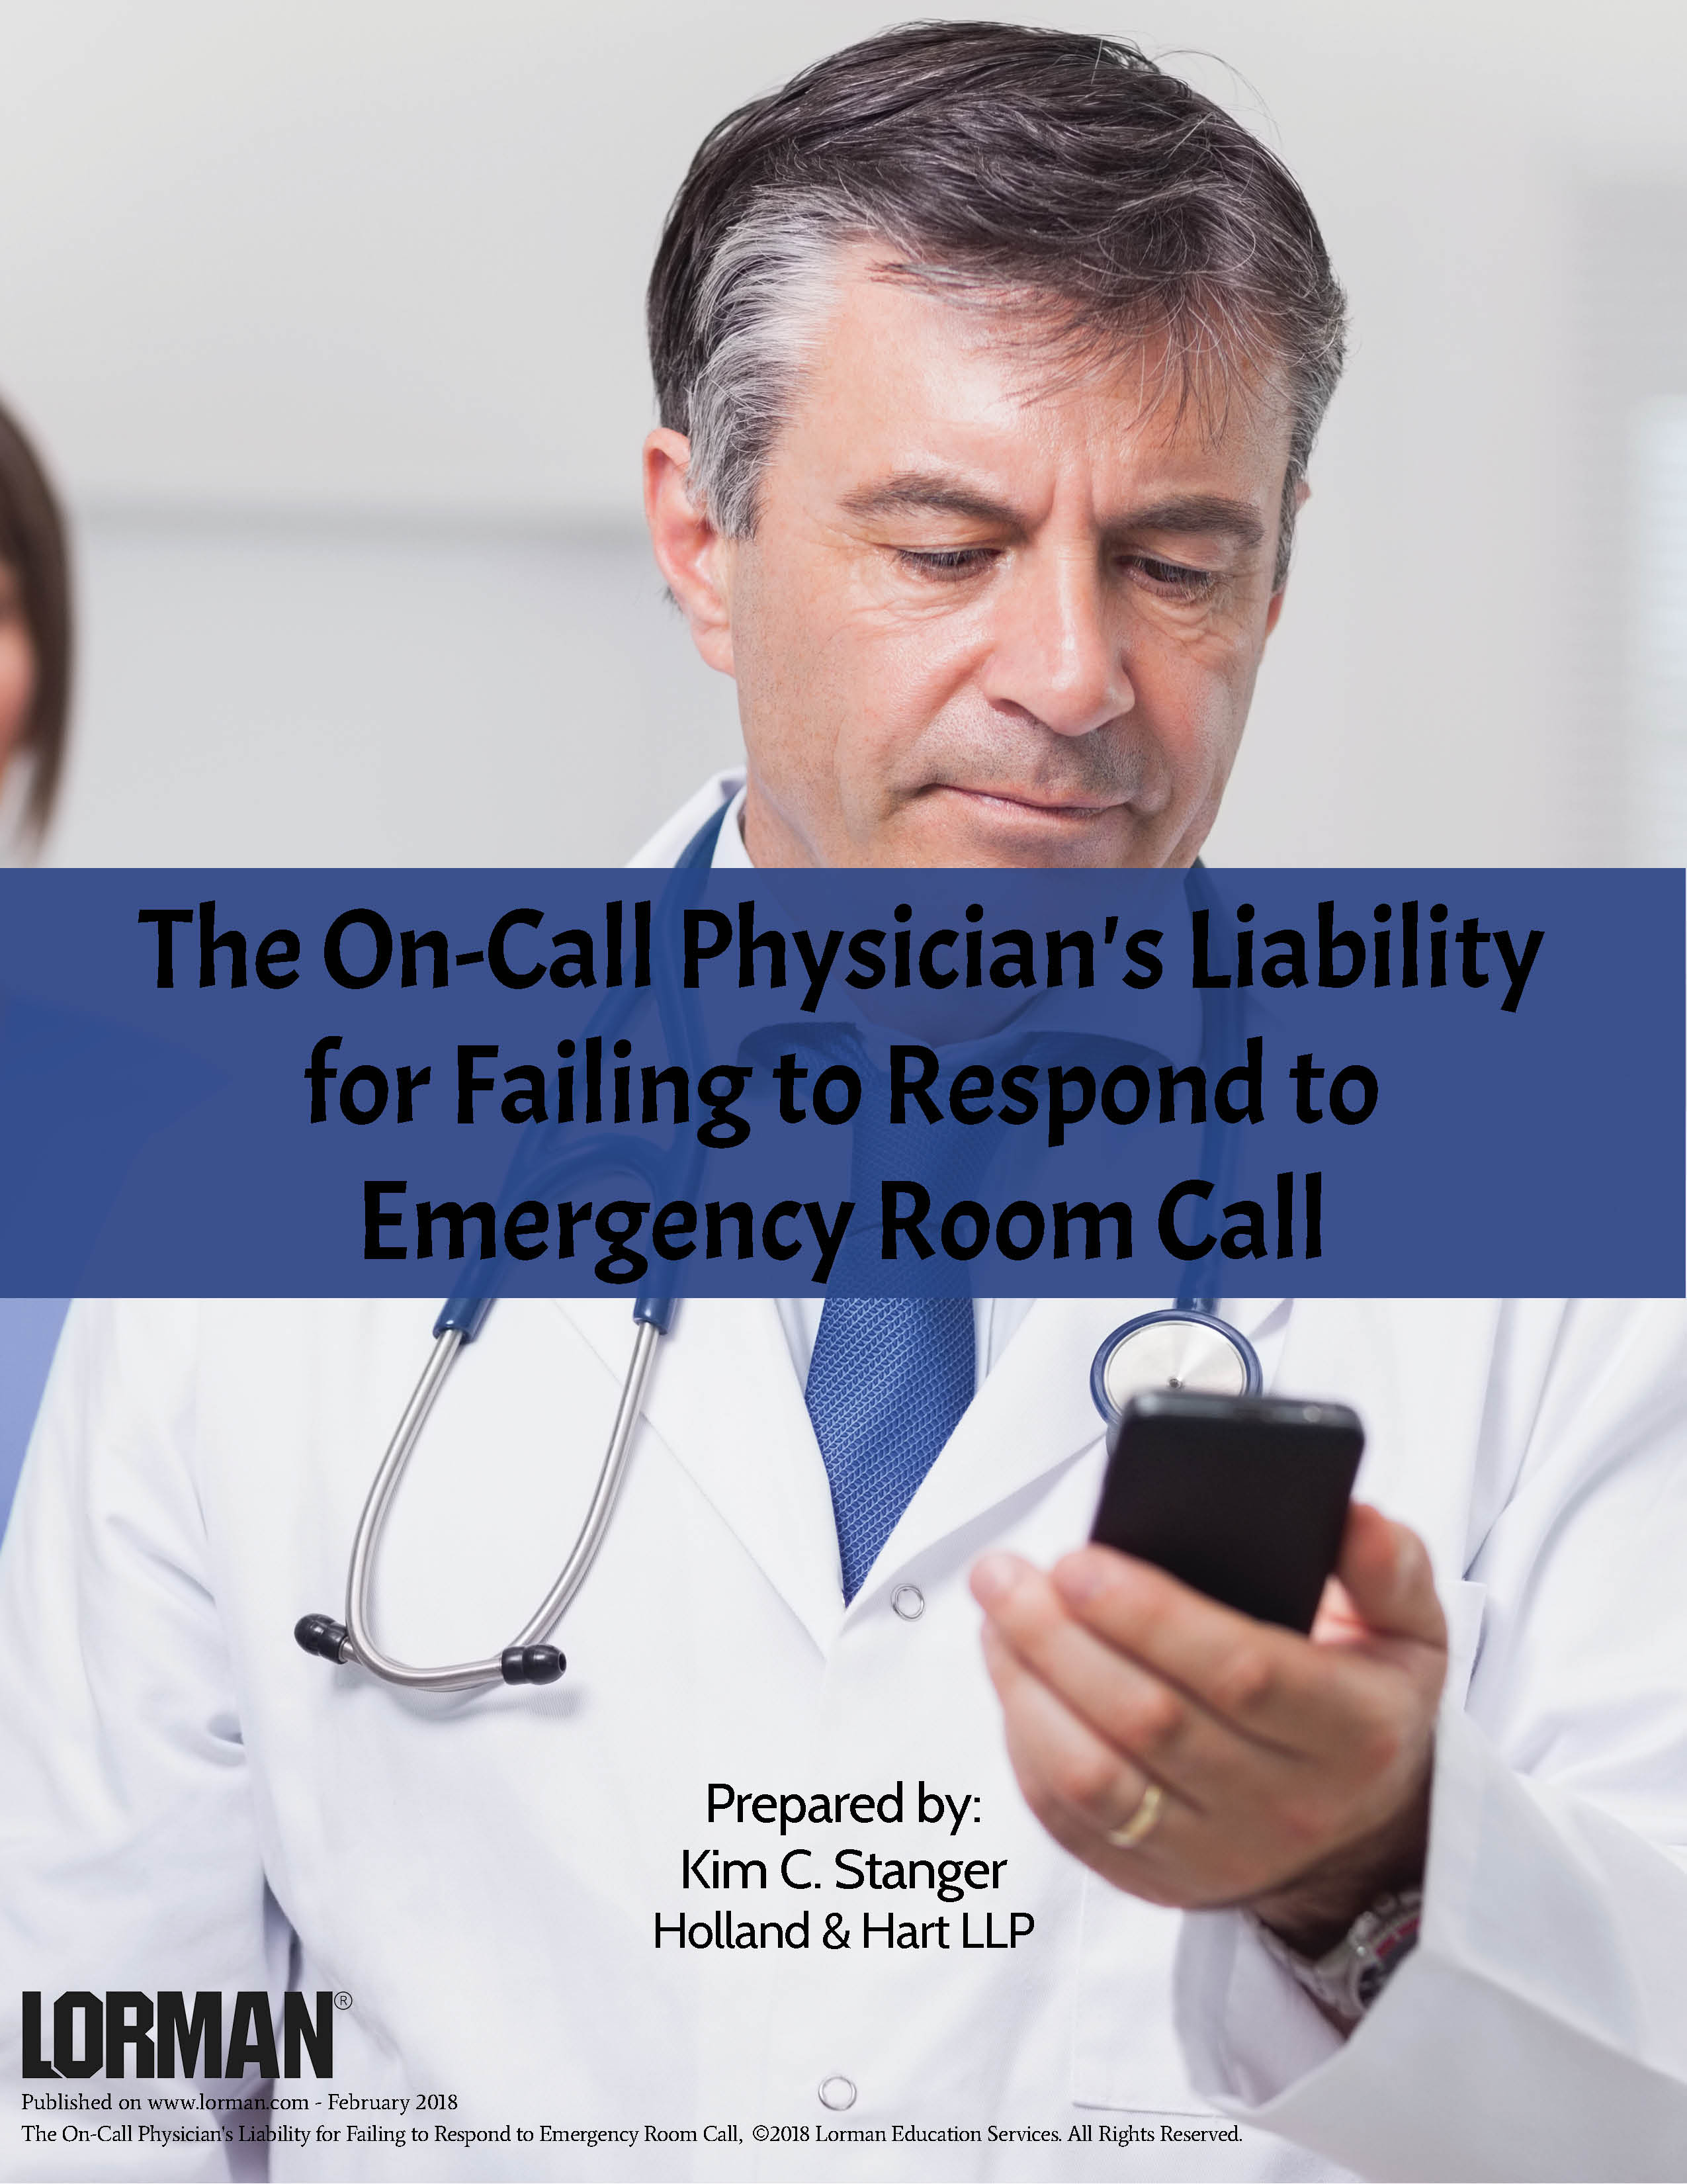 The On-Call Physician's Liability for Failing to Respond to Emergency Room Call